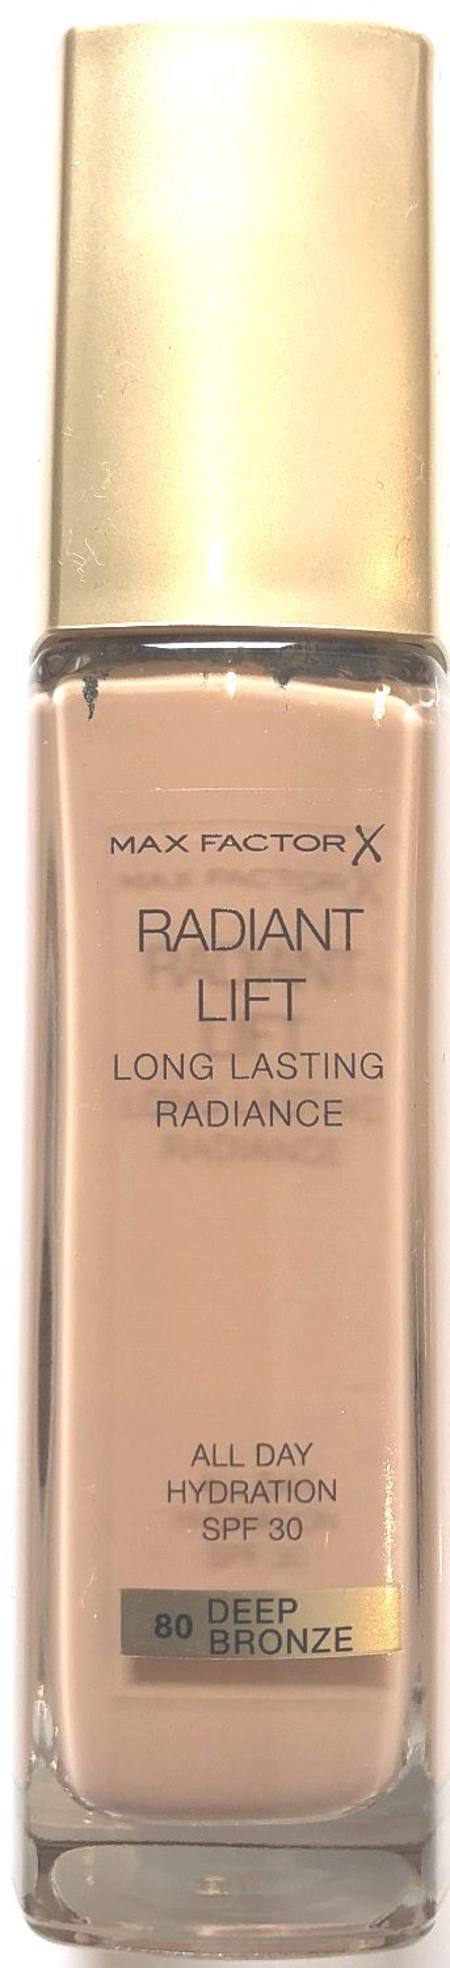 Buy MAX FACTOR 30mL FOUNDATION RADIANT LIFT 80 DEEP BRONZE (NON CARDED) in NZ. 